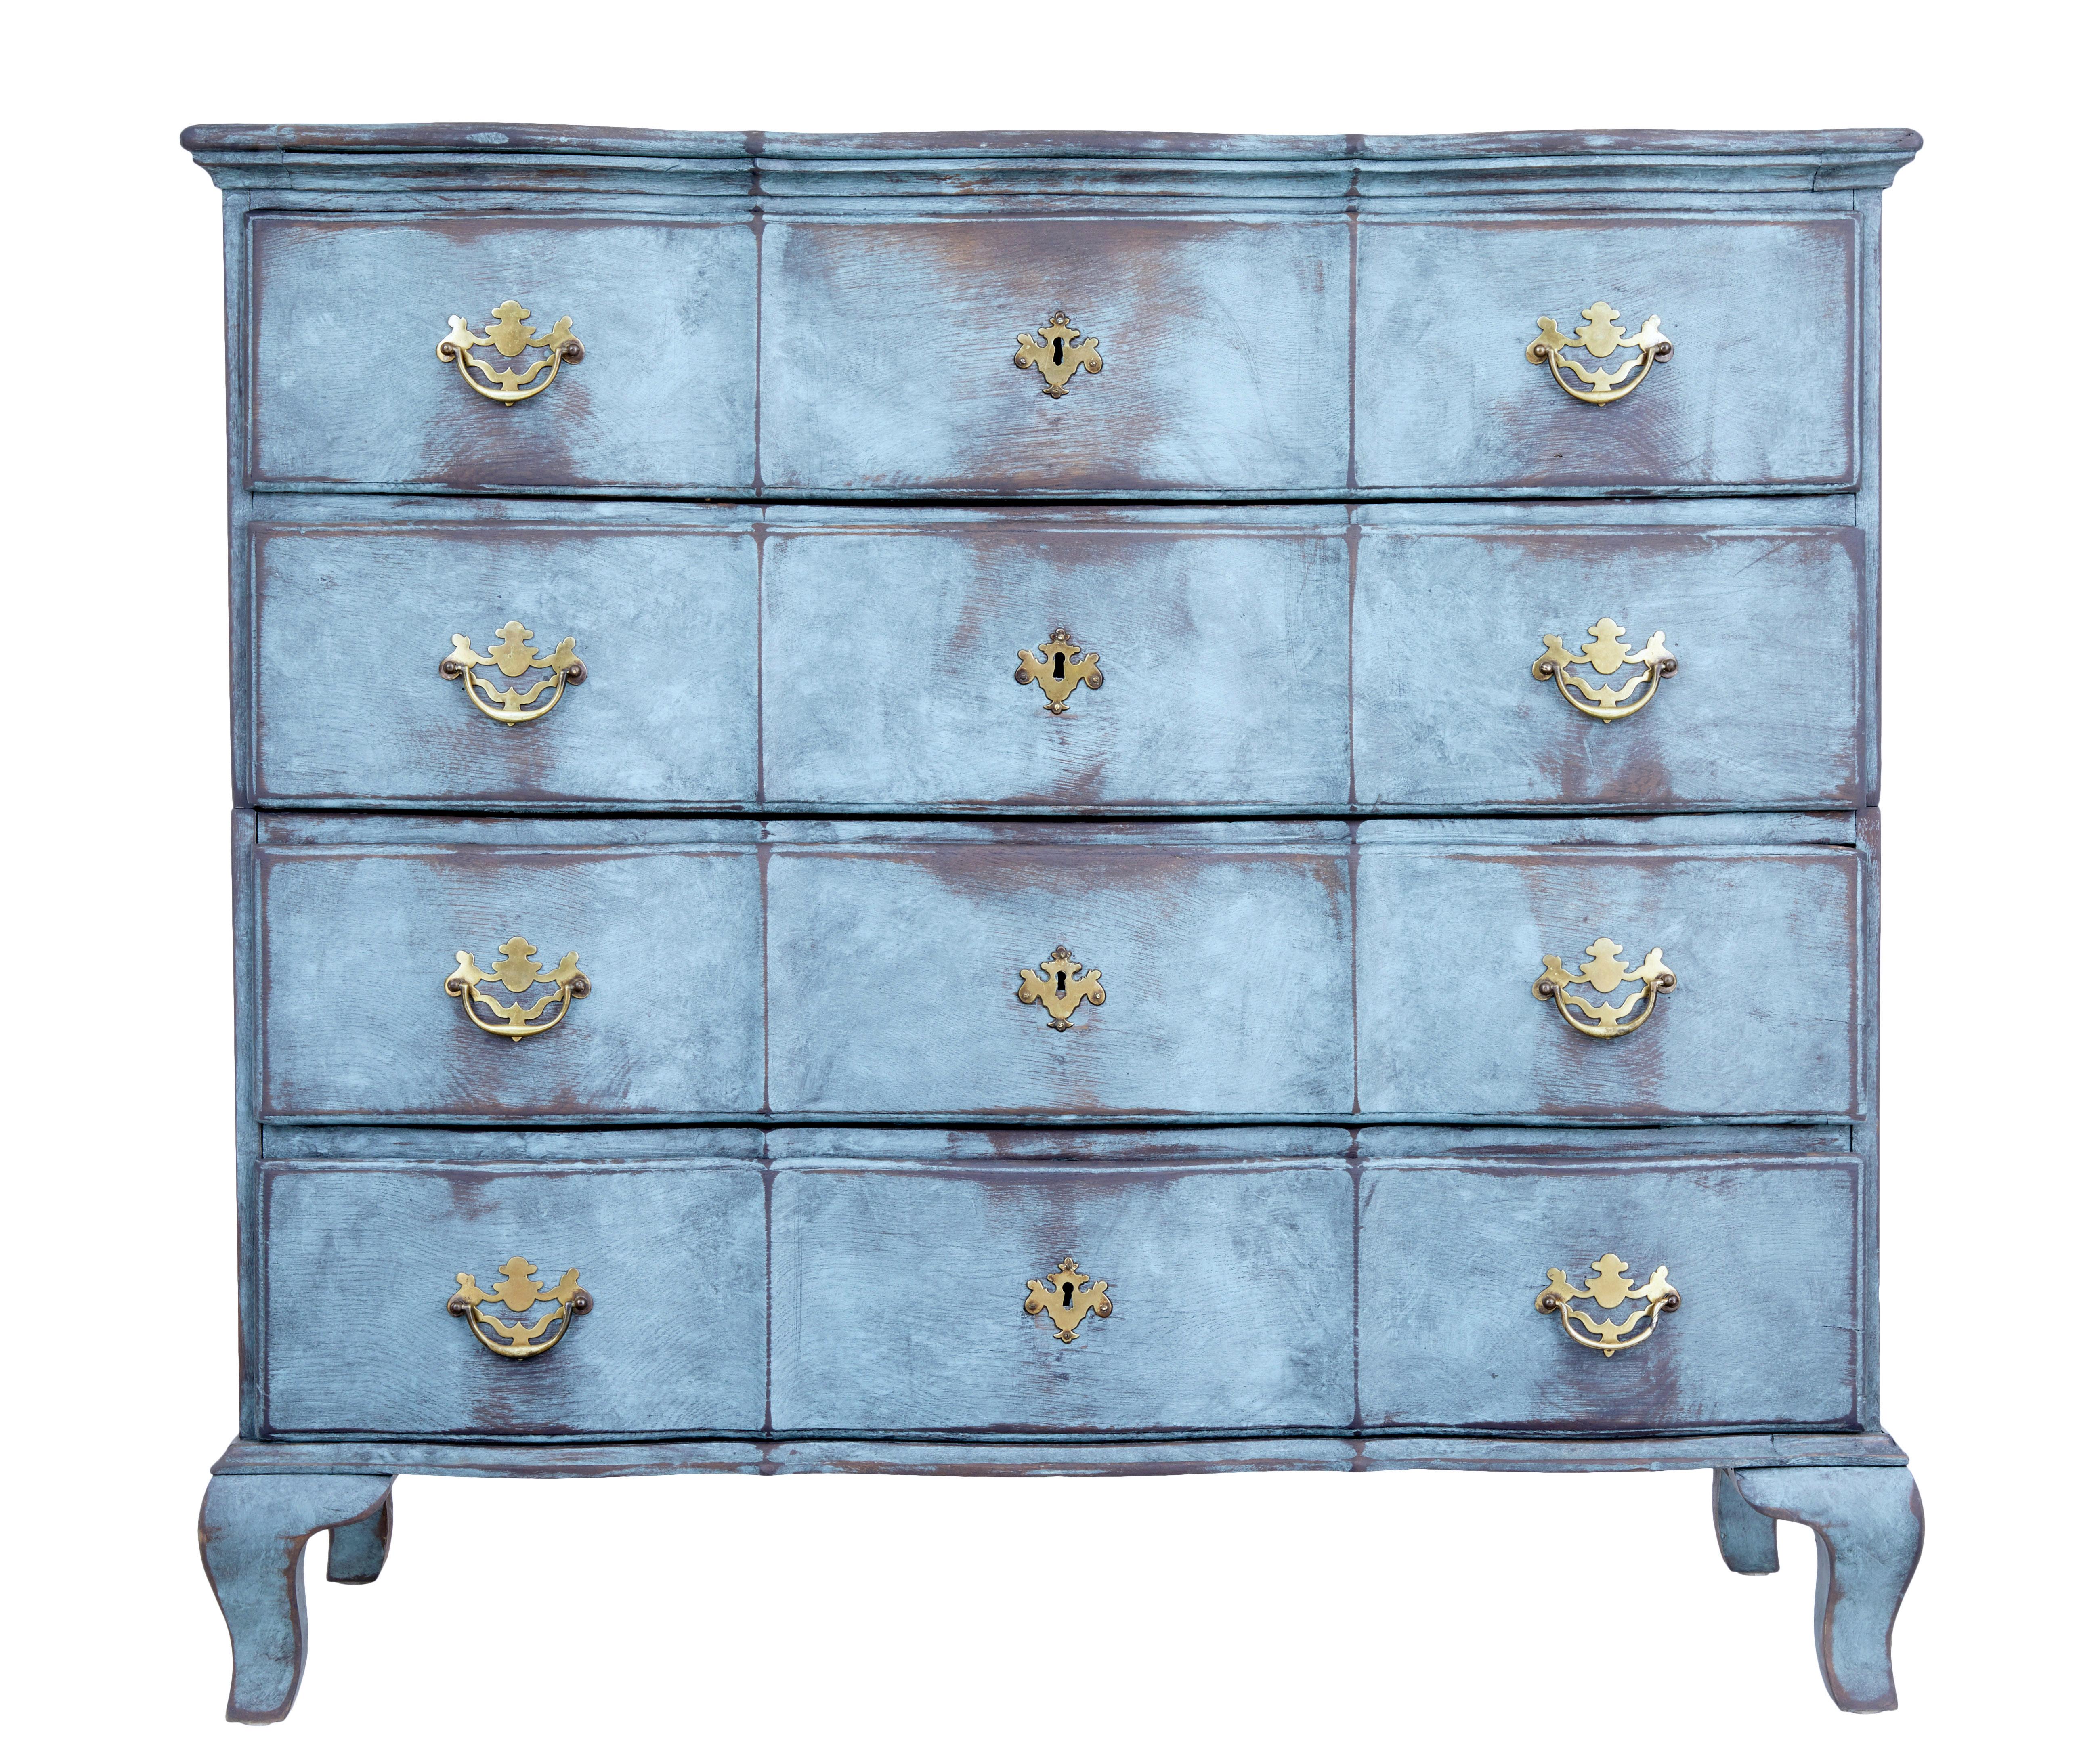 Danish painted chest of drawers of large proportions, circa 1790.

4 shaped drawers with ornate brass handles and key plates. Due to the size of the chest when made it was designed in 2 sections so it could be installed into smaller